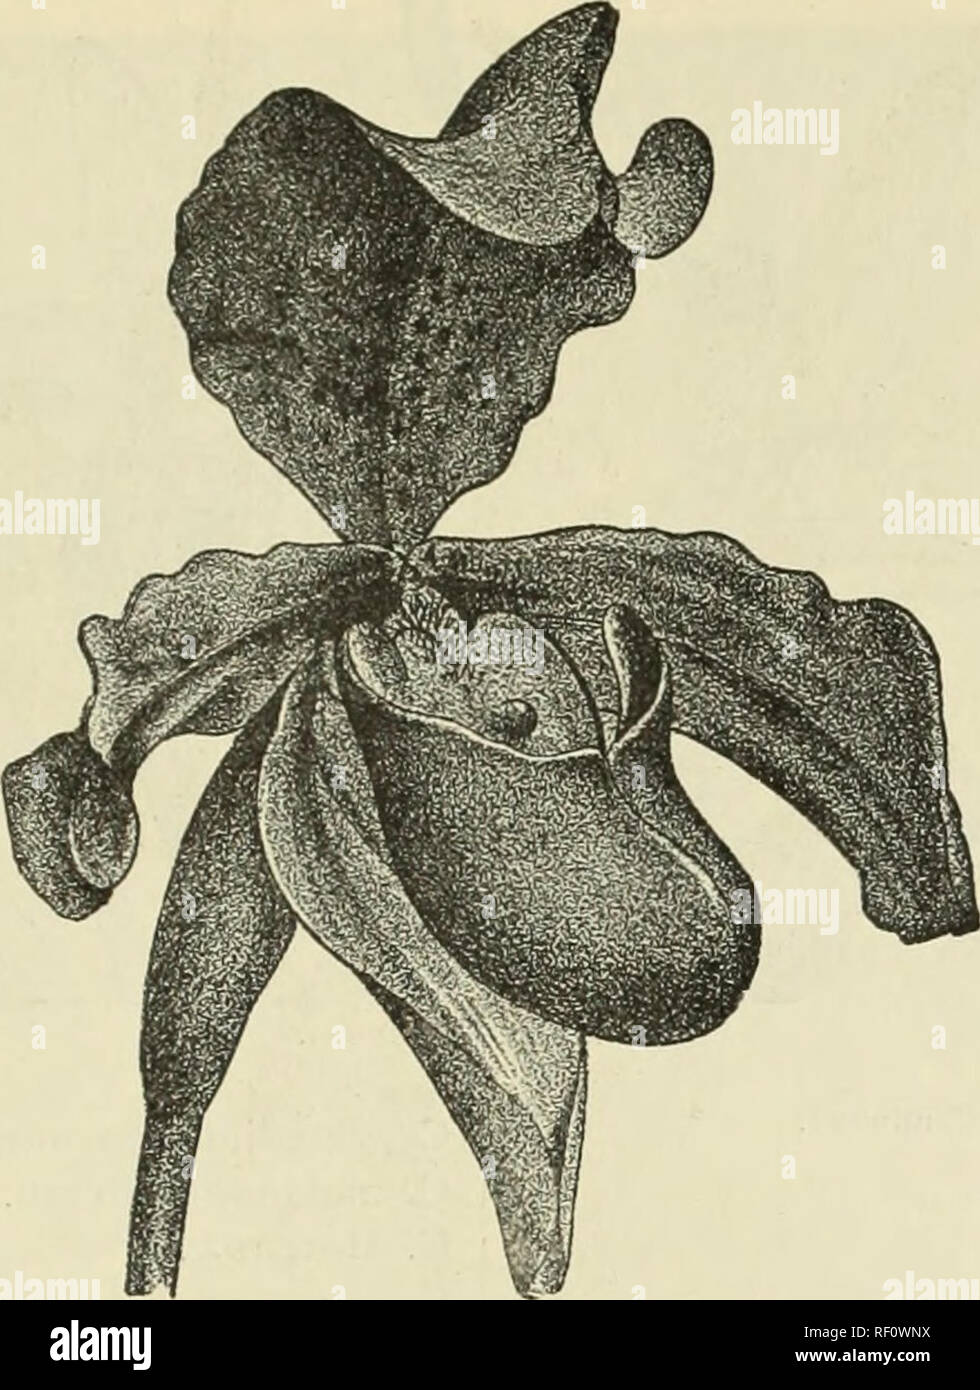 . Catalogue of orchids : orchids, palms and choice hothouse and greenhouse plants. Orchids, Catalogs; Plants, Ornamental, Catalogs; Commercial catalogs, New York (State), Utica. CATALOGUE OF ORCHIDS.. C WKIPKMUM 1NS1GKE. CCELOGYNE, Continued. C. cristata. C. Forstermaoni. Colax Jugosus. Nearly related to the Lycastes. Comparetia macroplectrum. Pretty rose-colored flowers. Cymbidium. A well-known genus of excellent habit, with fine evergreen foliage and large flowers in racemes. They require a warm temperature. C. Alcefolium. C. eburneum. C. giganteum. C. Lowianum. C. Mastersi. C. pendulum. Cyp Stock Photo